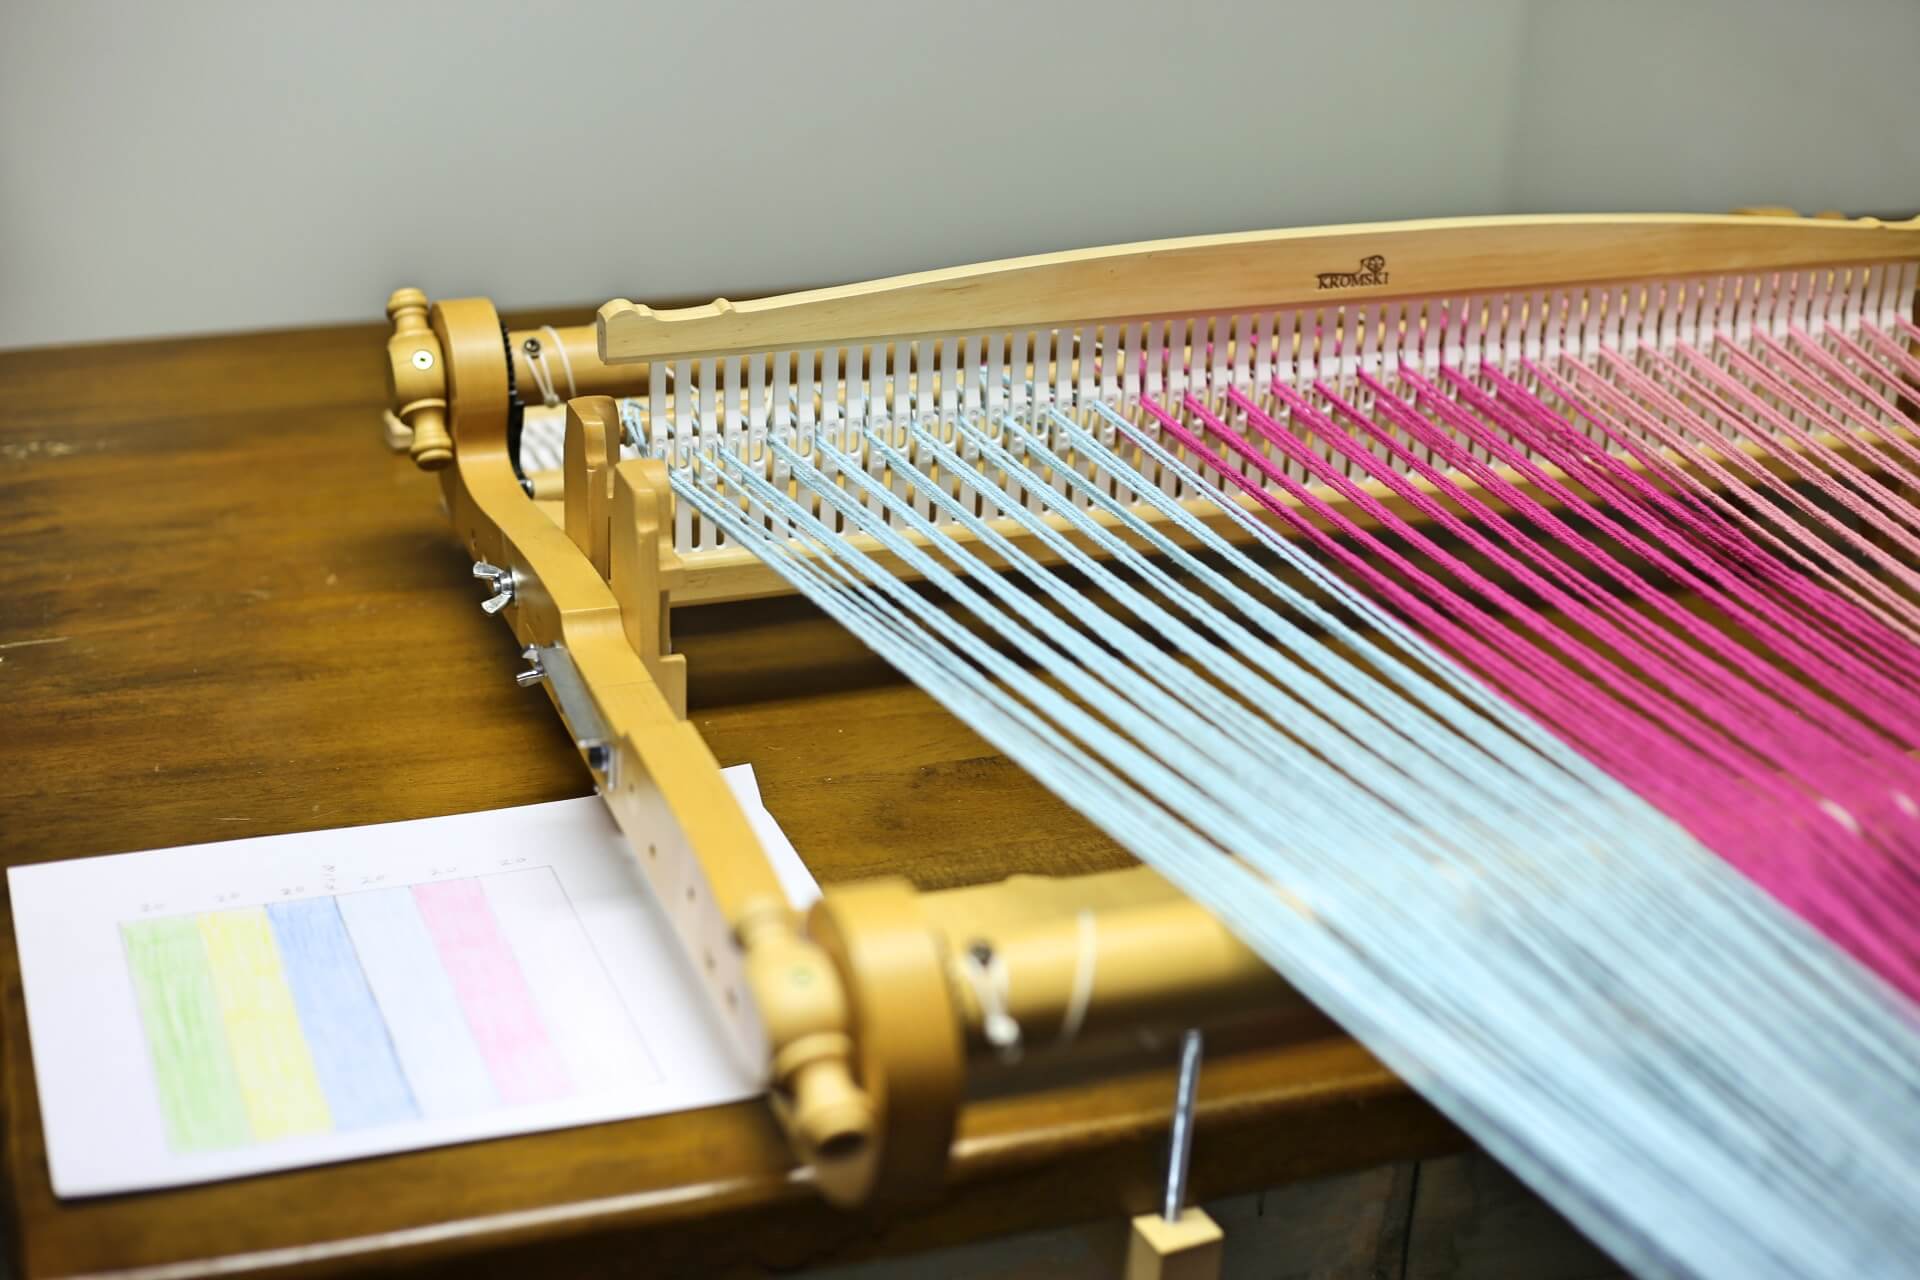 Double Weave Part 1 - How to Warp a Second Heddle.